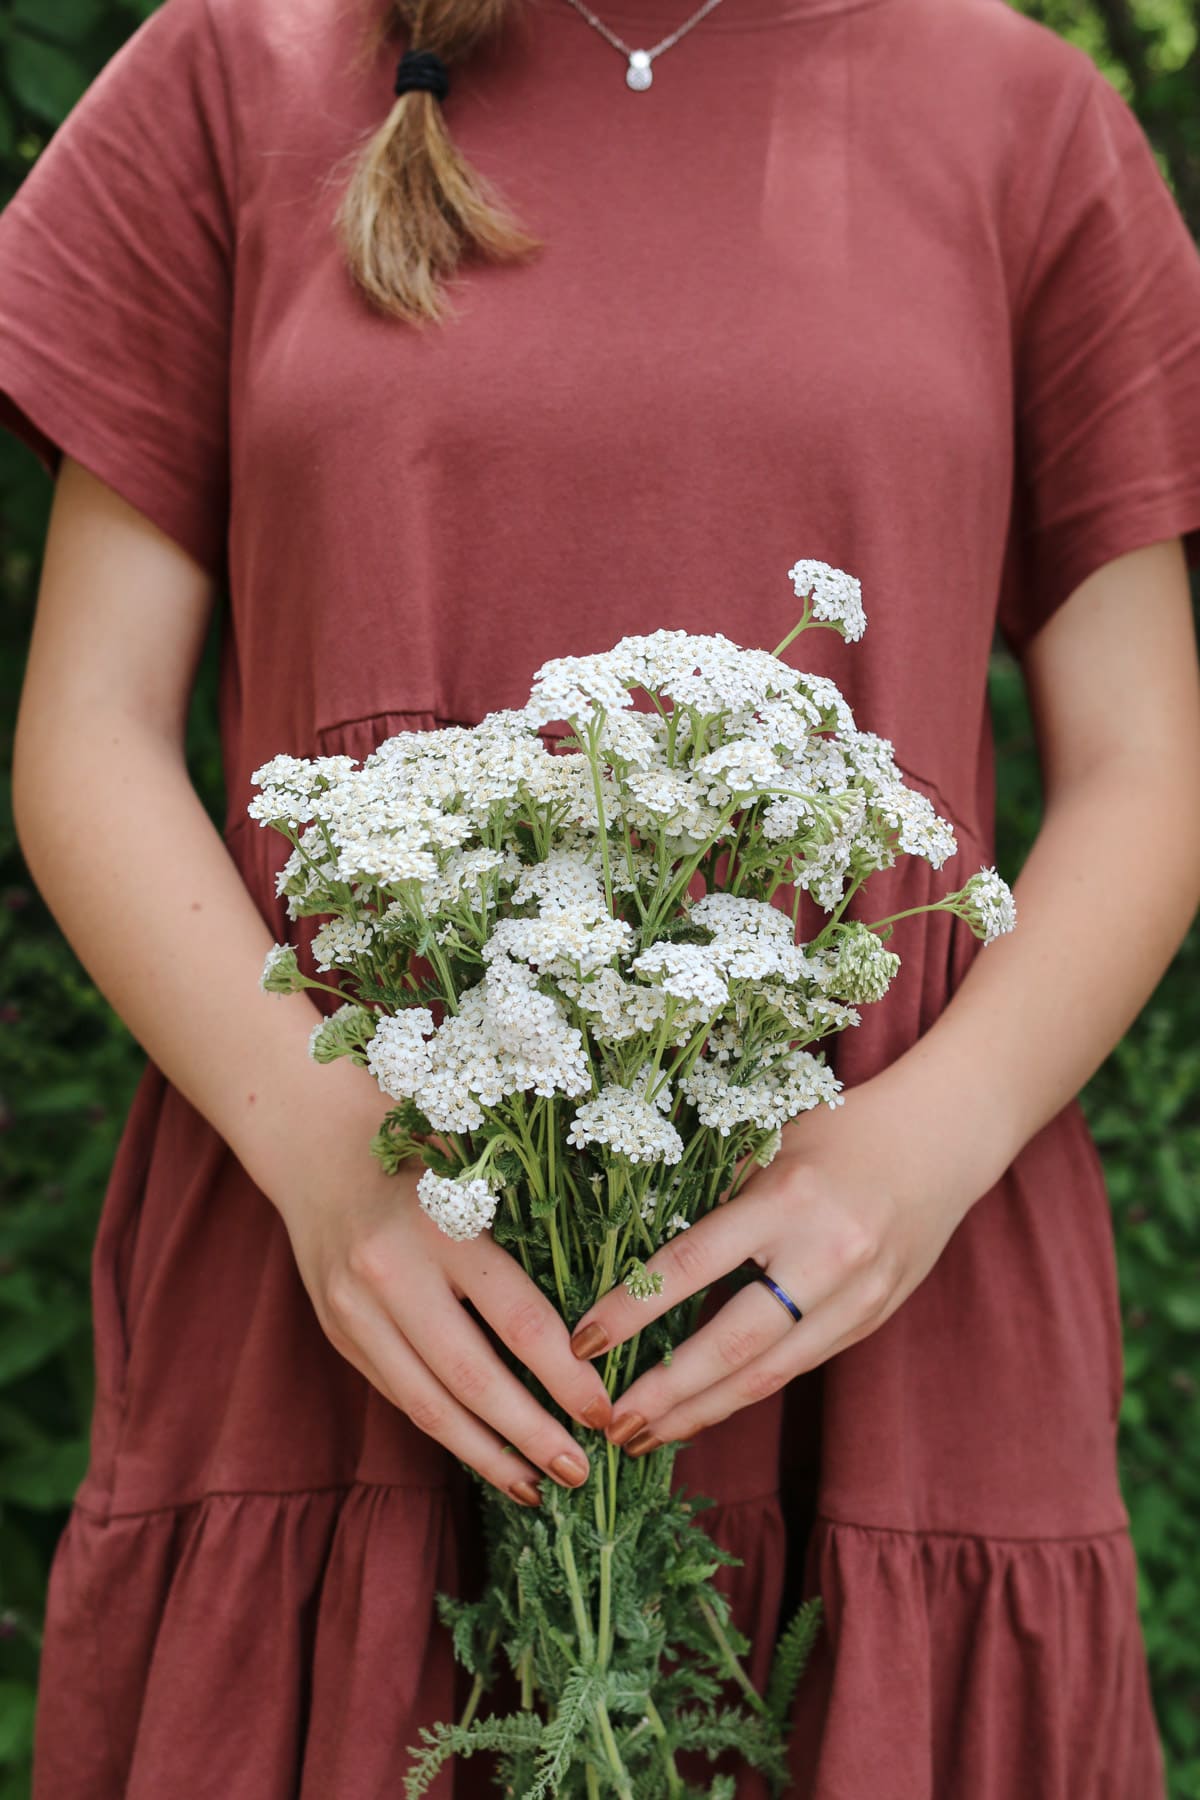 A girl holds a bouquet of white flowers